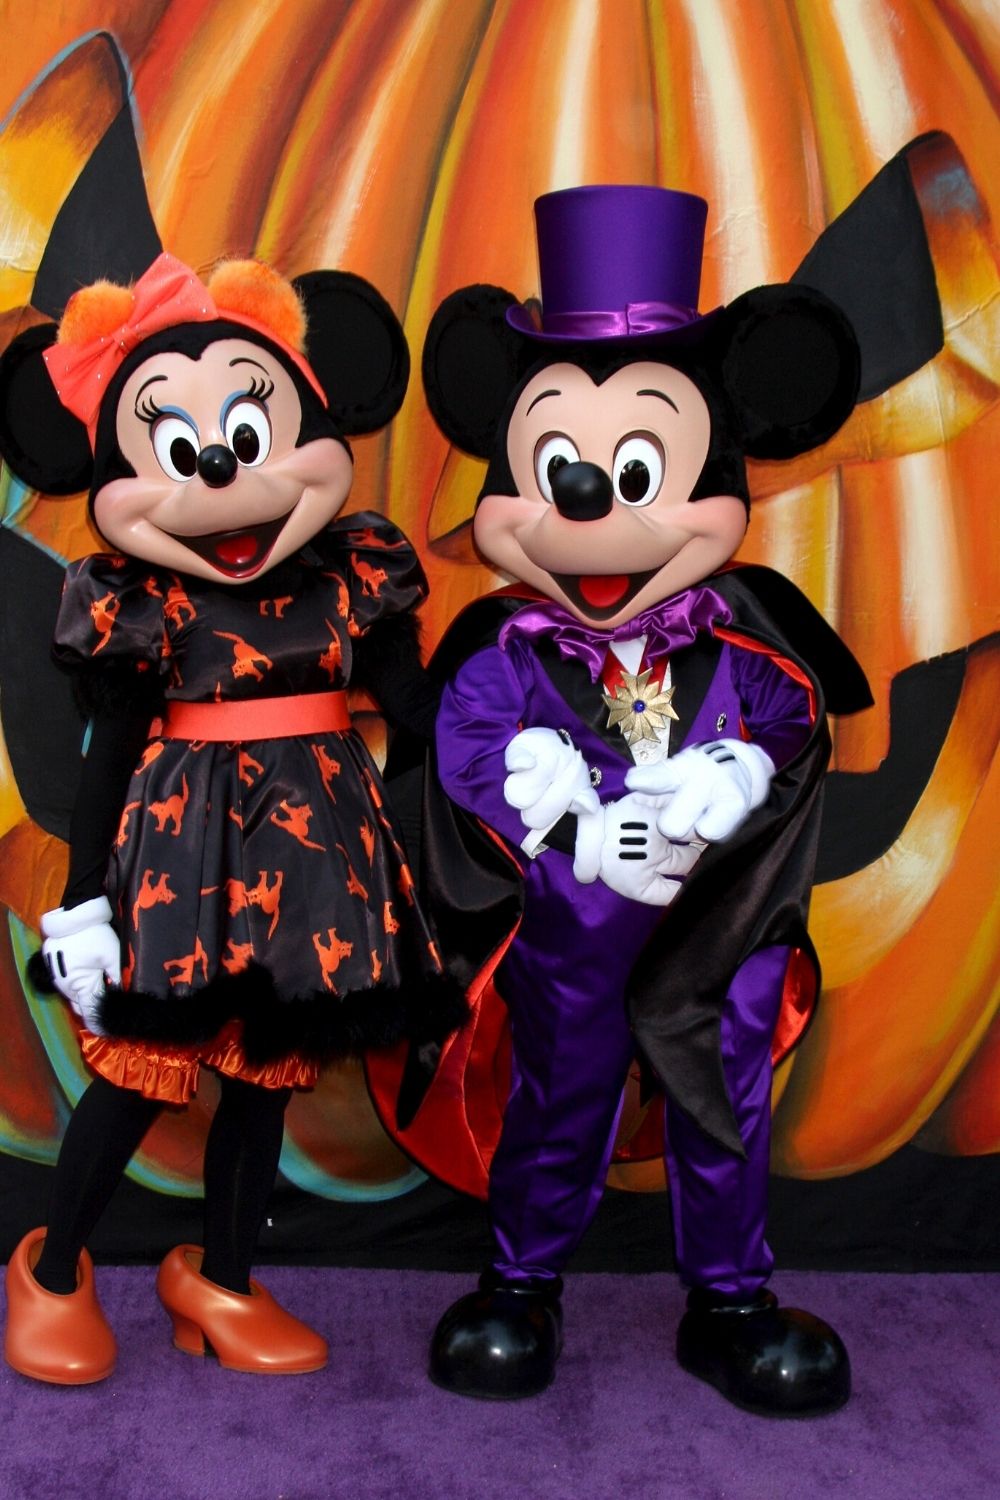 Mickey and Minnie Mouse in Halloween attire at Disney World